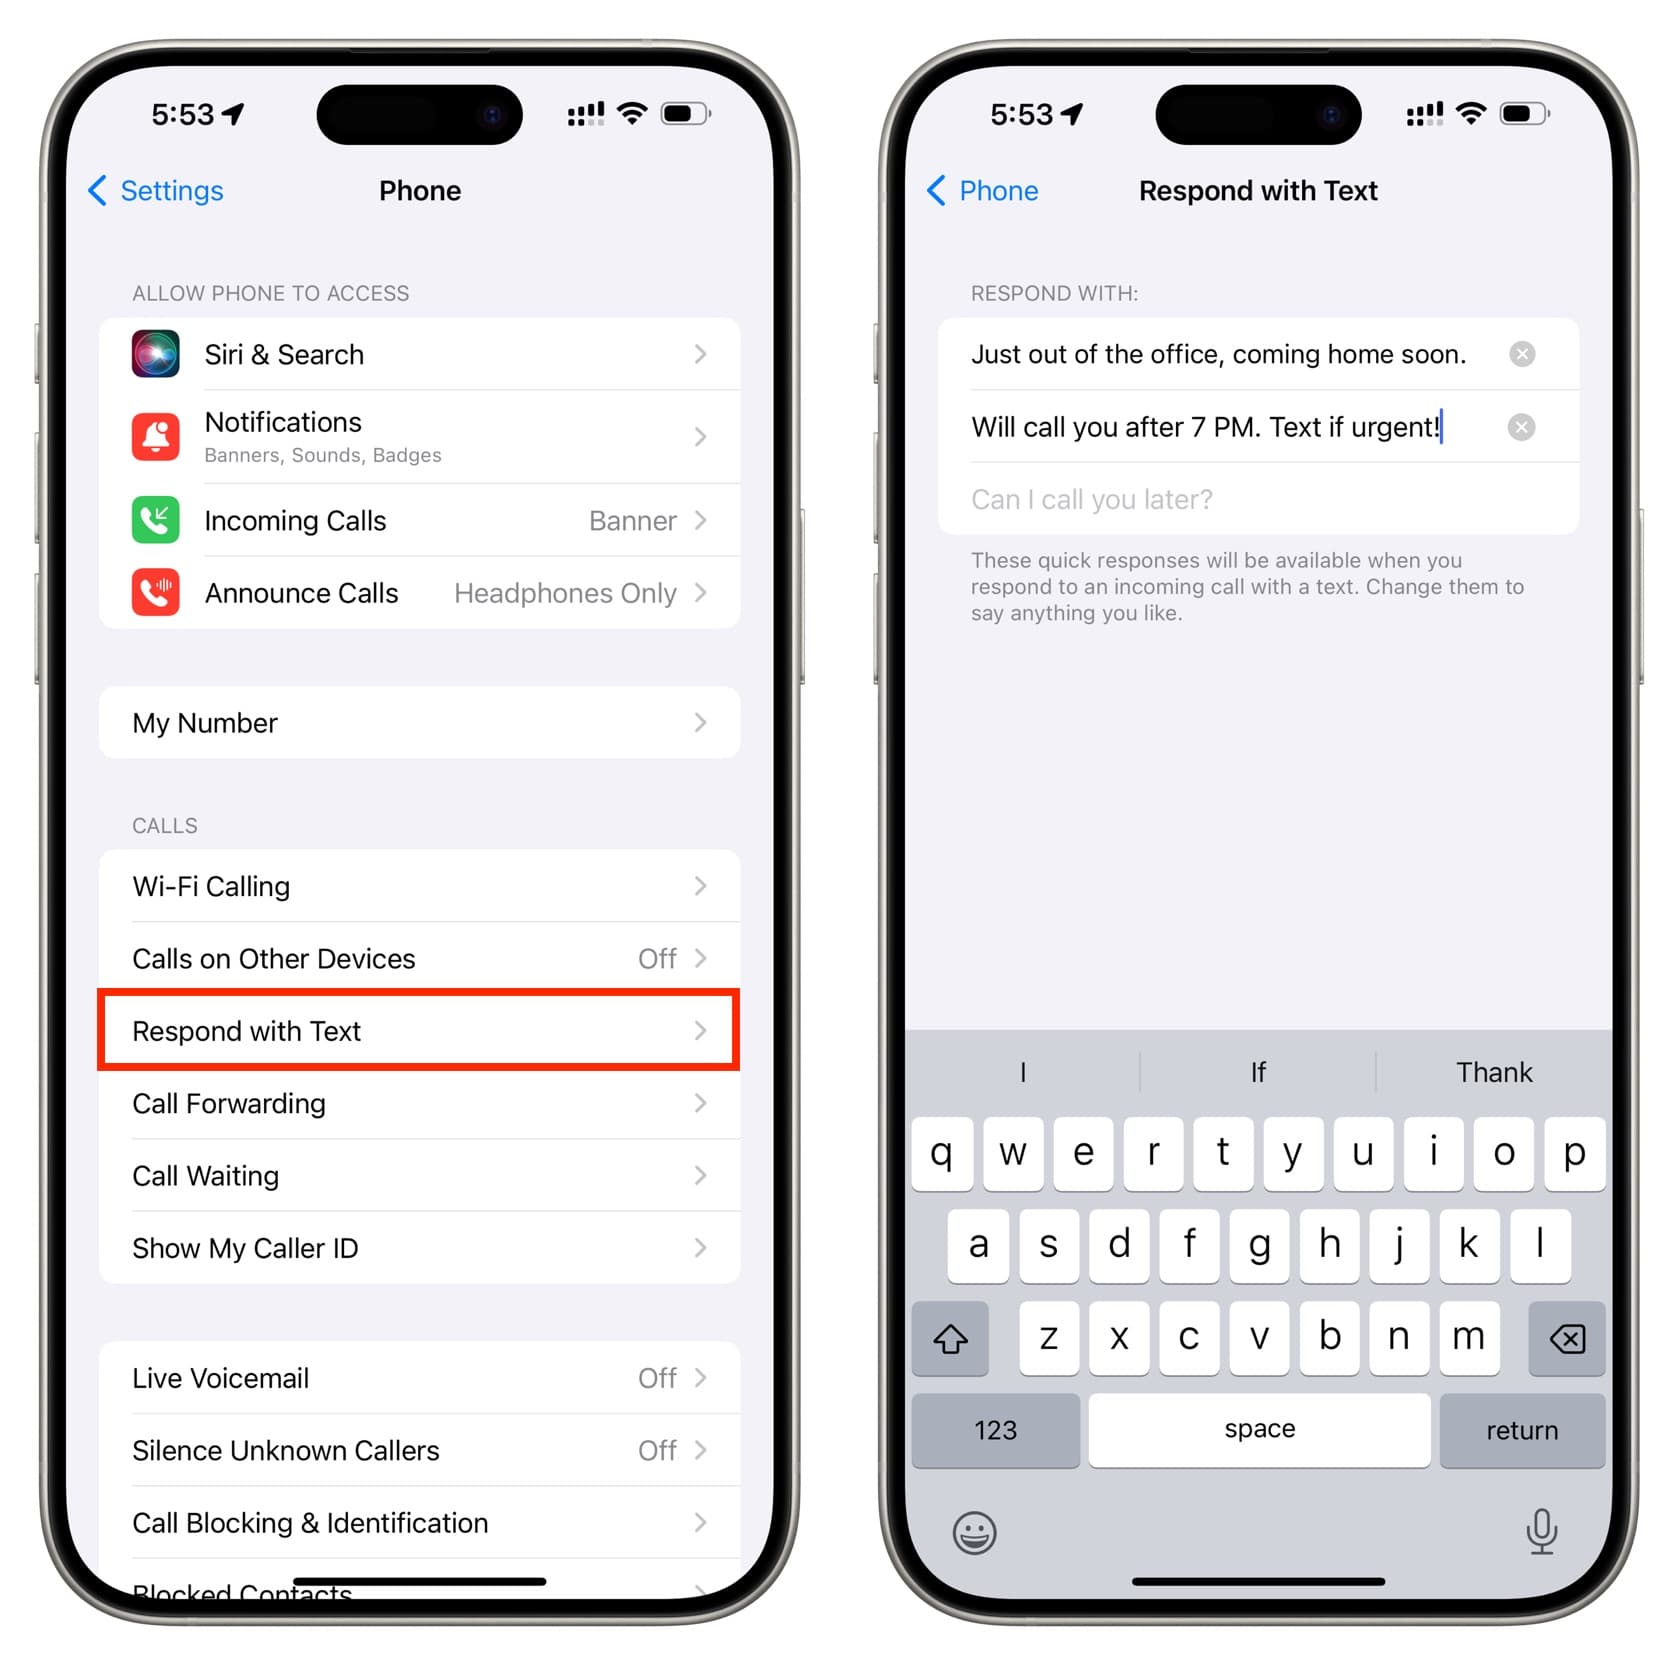 Customize Respond with Text messages in iPhone settings